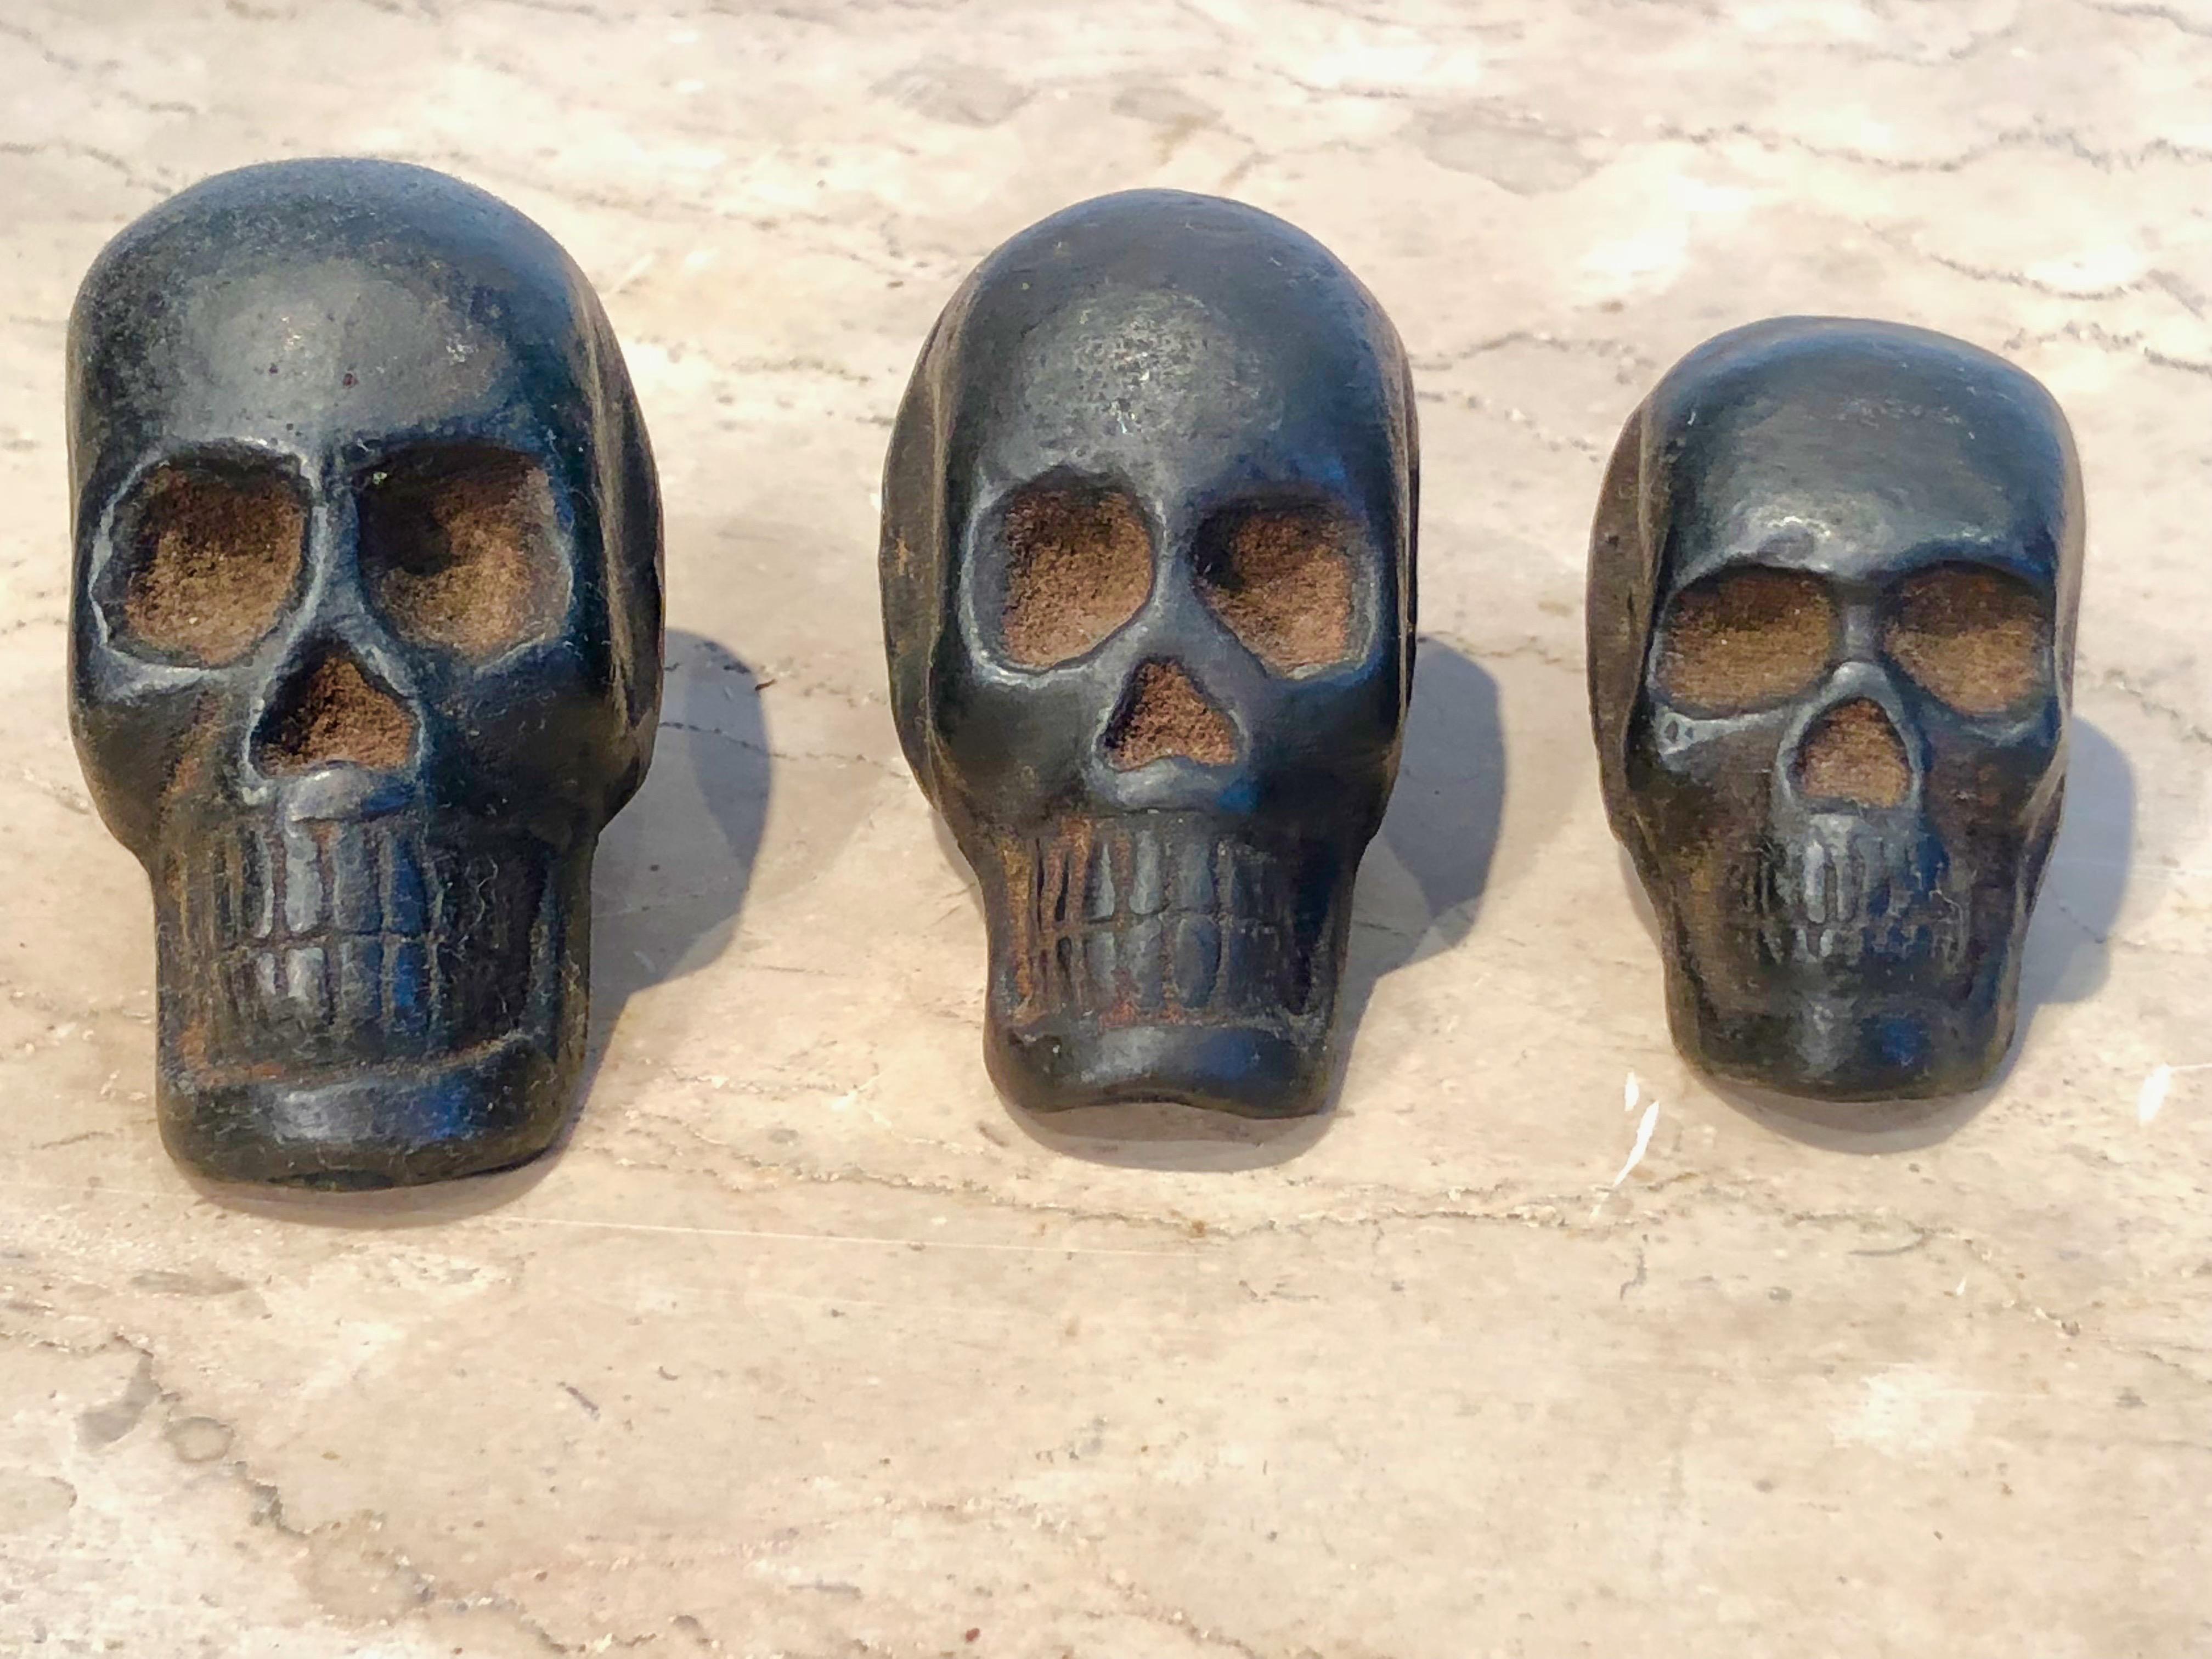 We bought these cast iron skulls because they are so very cool, although probably not very old. Presumably opium weights, they have little wells on the underside of the skulls for weighing out opium, but since we're not in the opium business, we